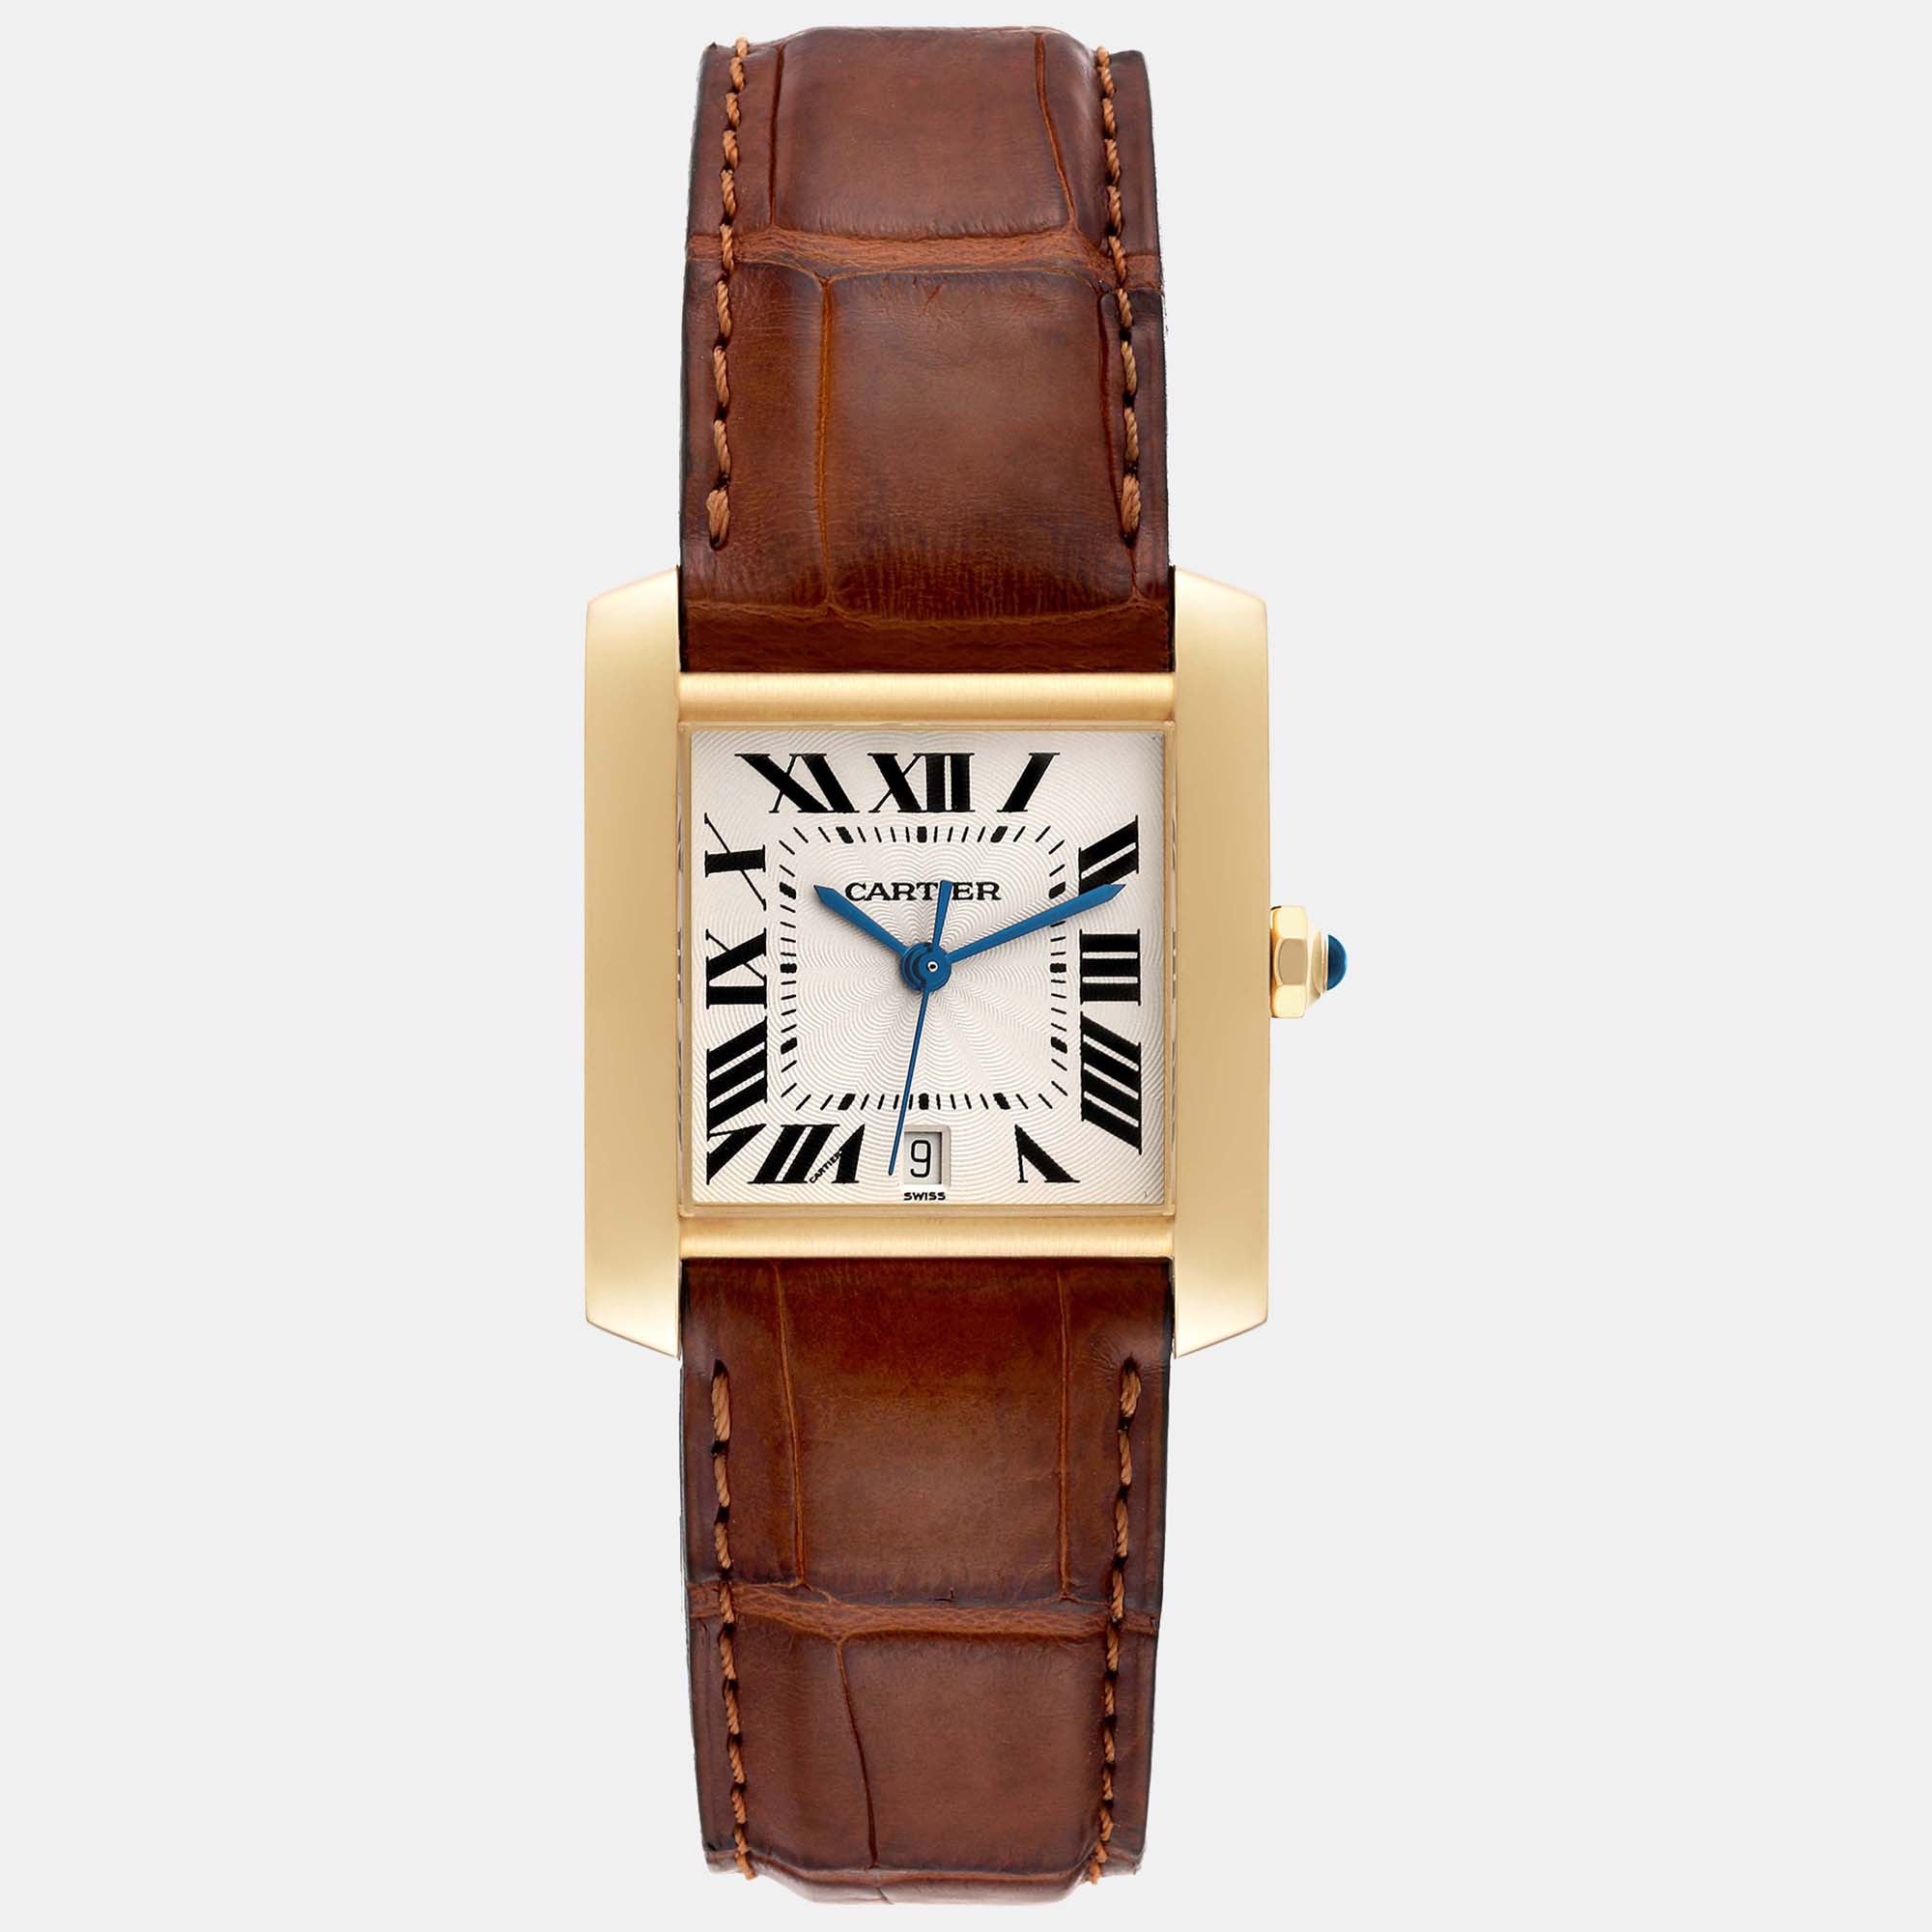 Cartier tank francaise large yellow gold automatic men's watch 28 mm